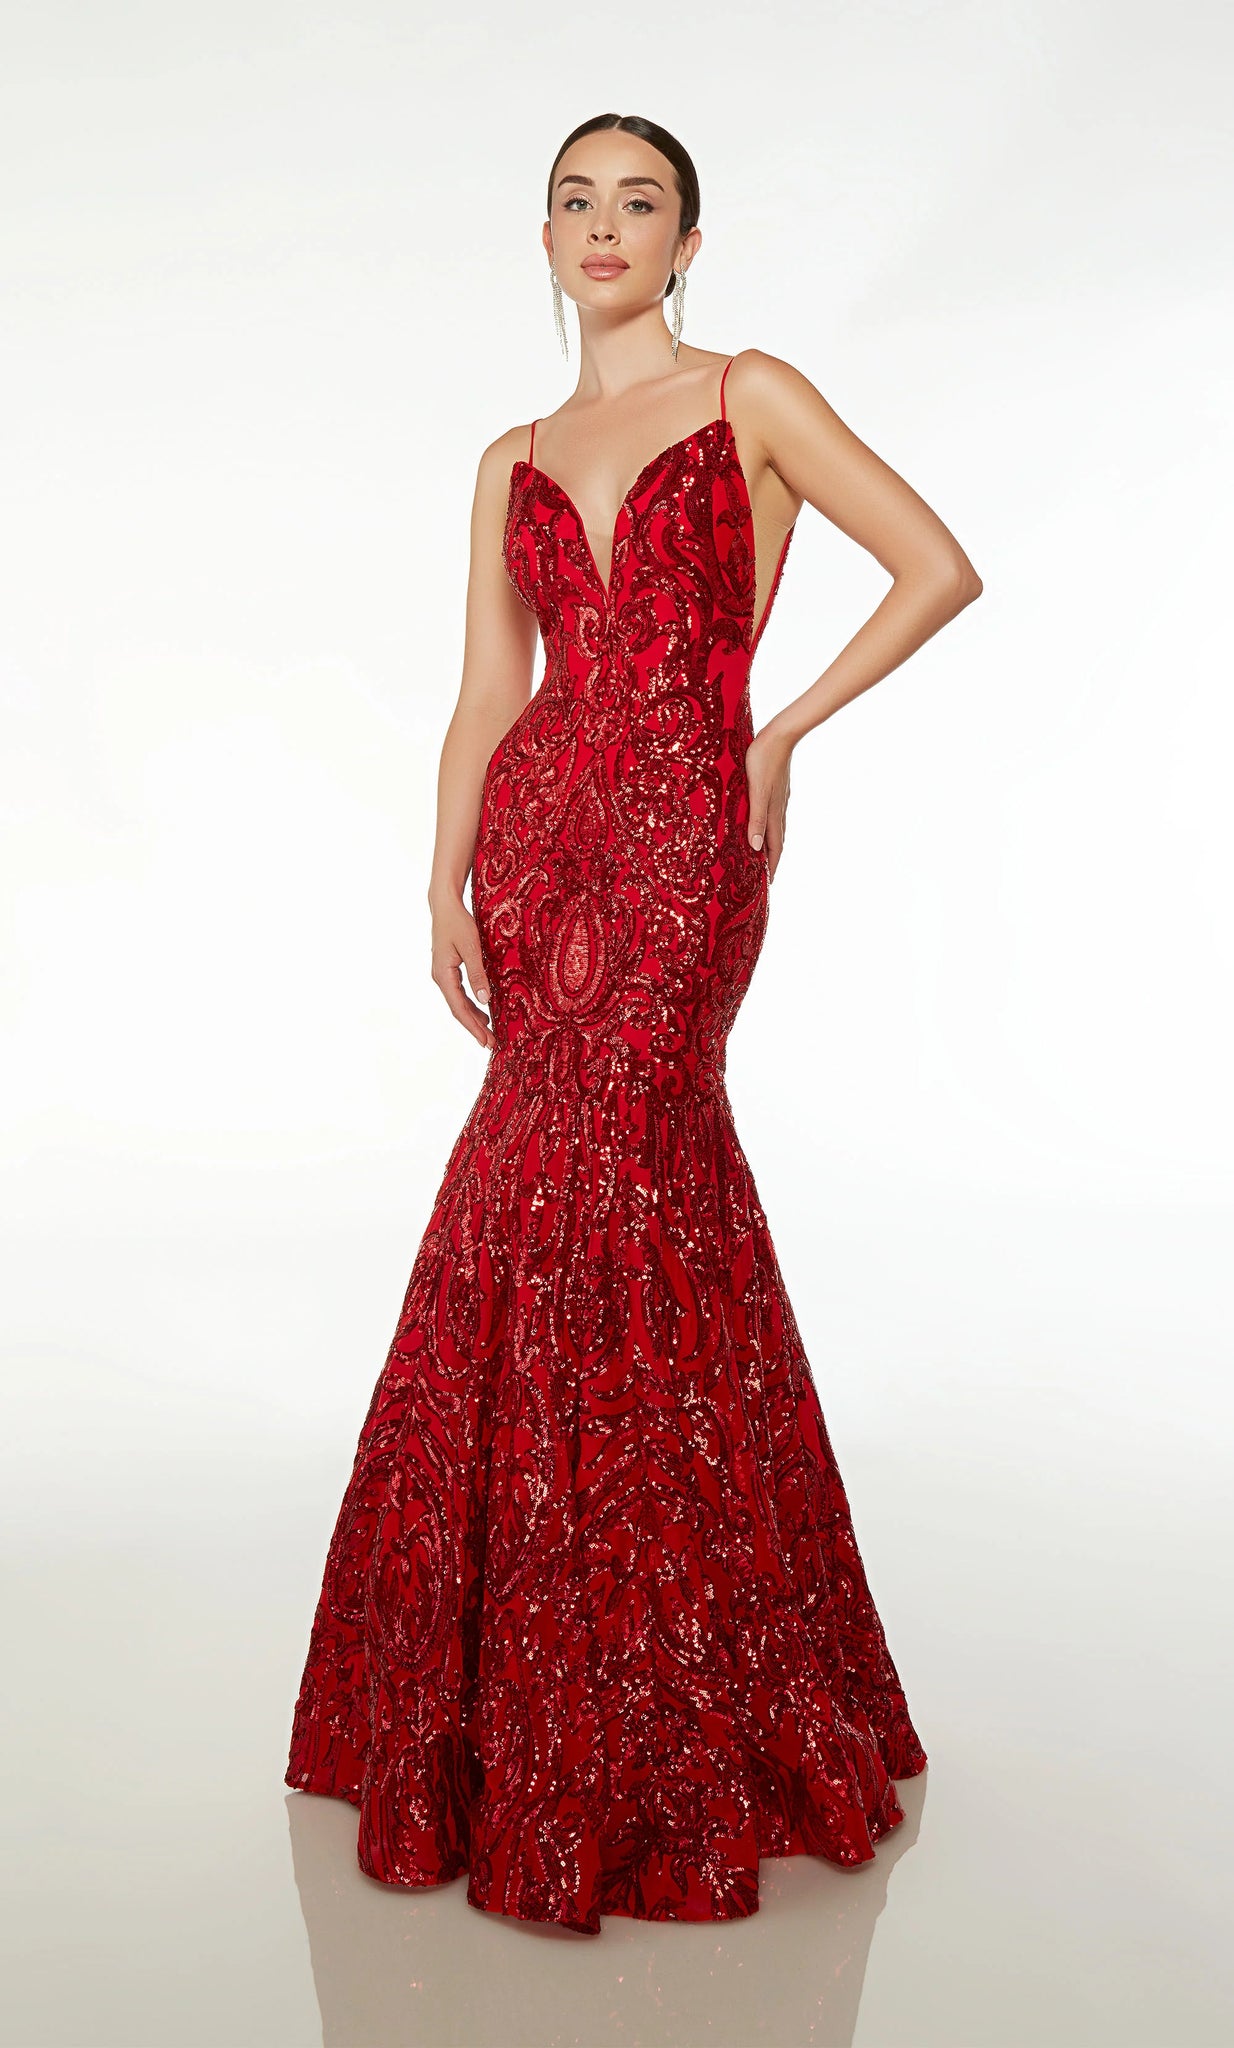 Turn heads when you step into the room wearing this captivating fully beaded Alyce Paris long prom dress 61607. The fitted zip up bodice features a trendy V neckline and the skirt has a long glistening sweep train. Whimsical sequin beaded patterns adorn the entirety of the dress giving you ideal radiance and detail.